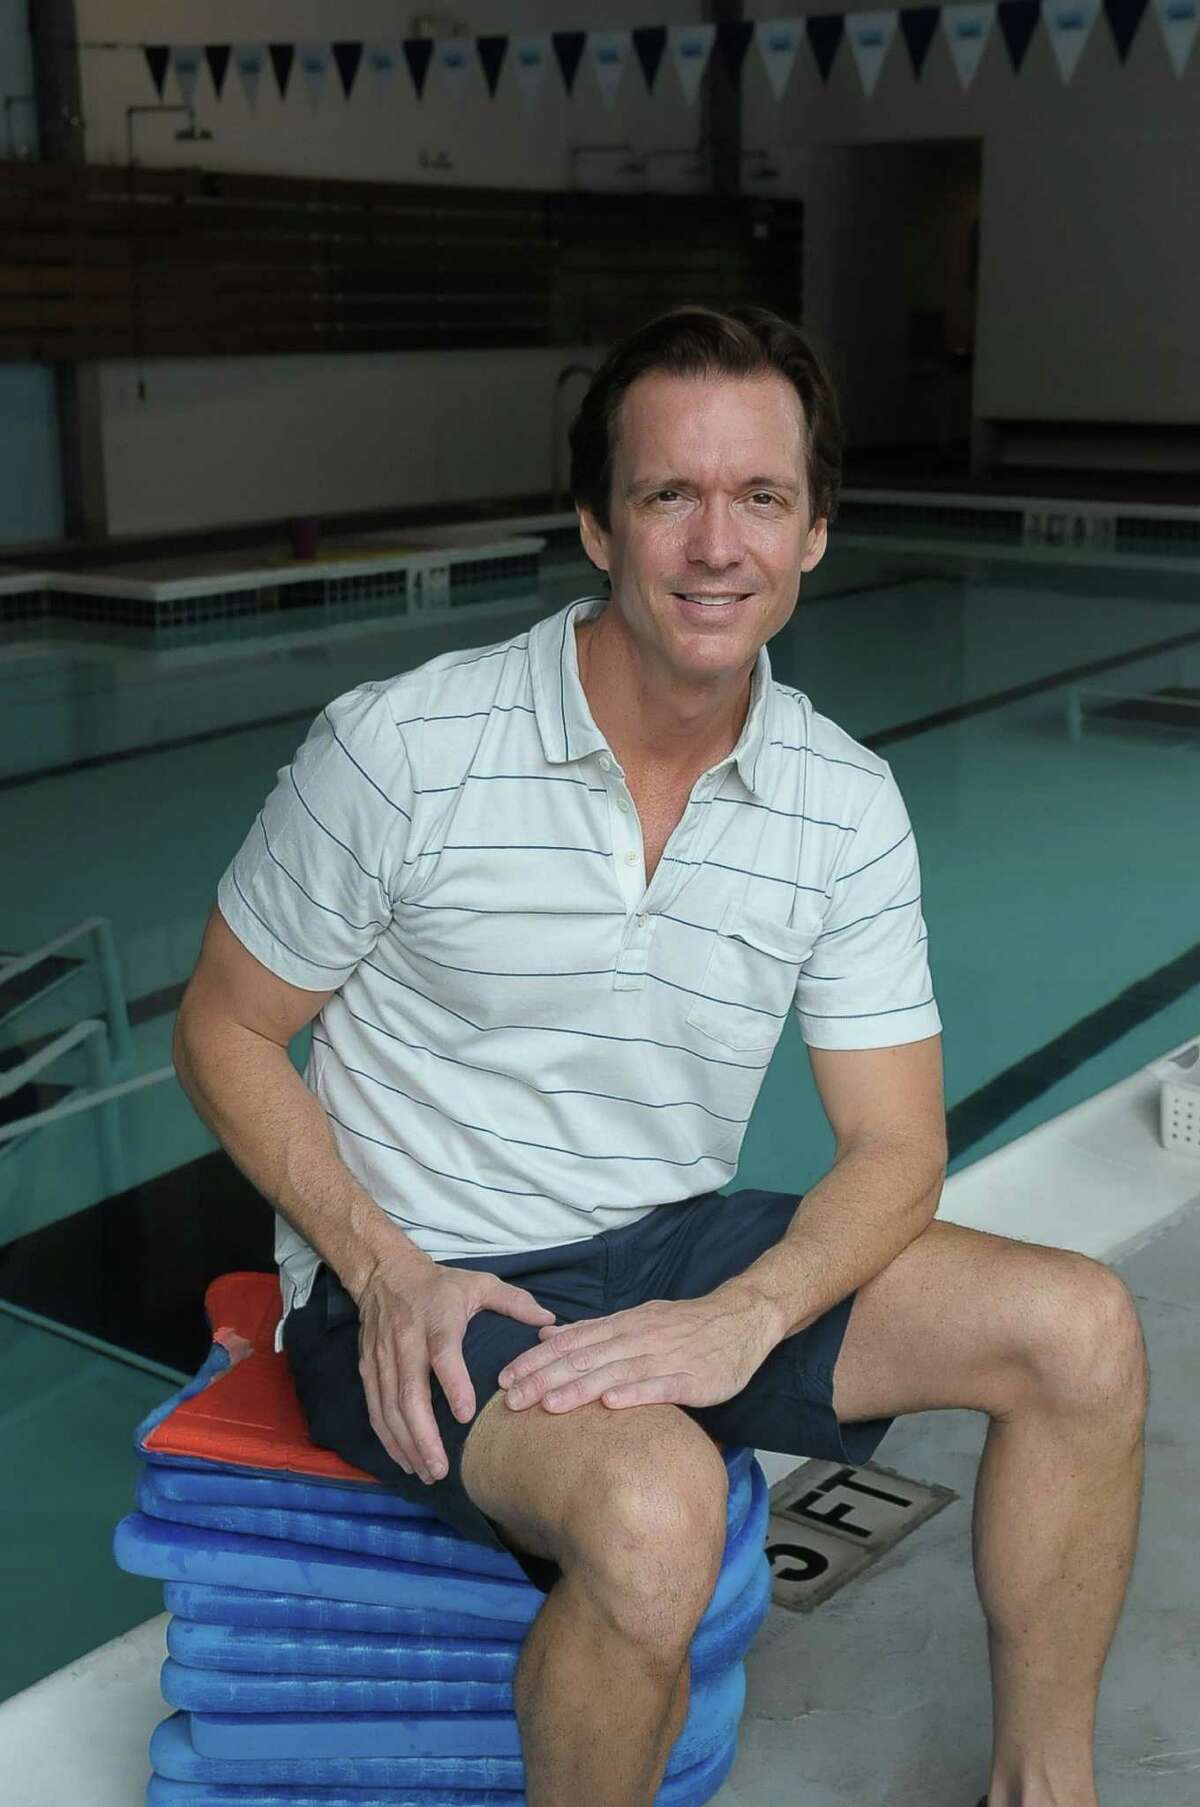 Chad Neal is celebrating the Saint Street Swim's 20th year in business.